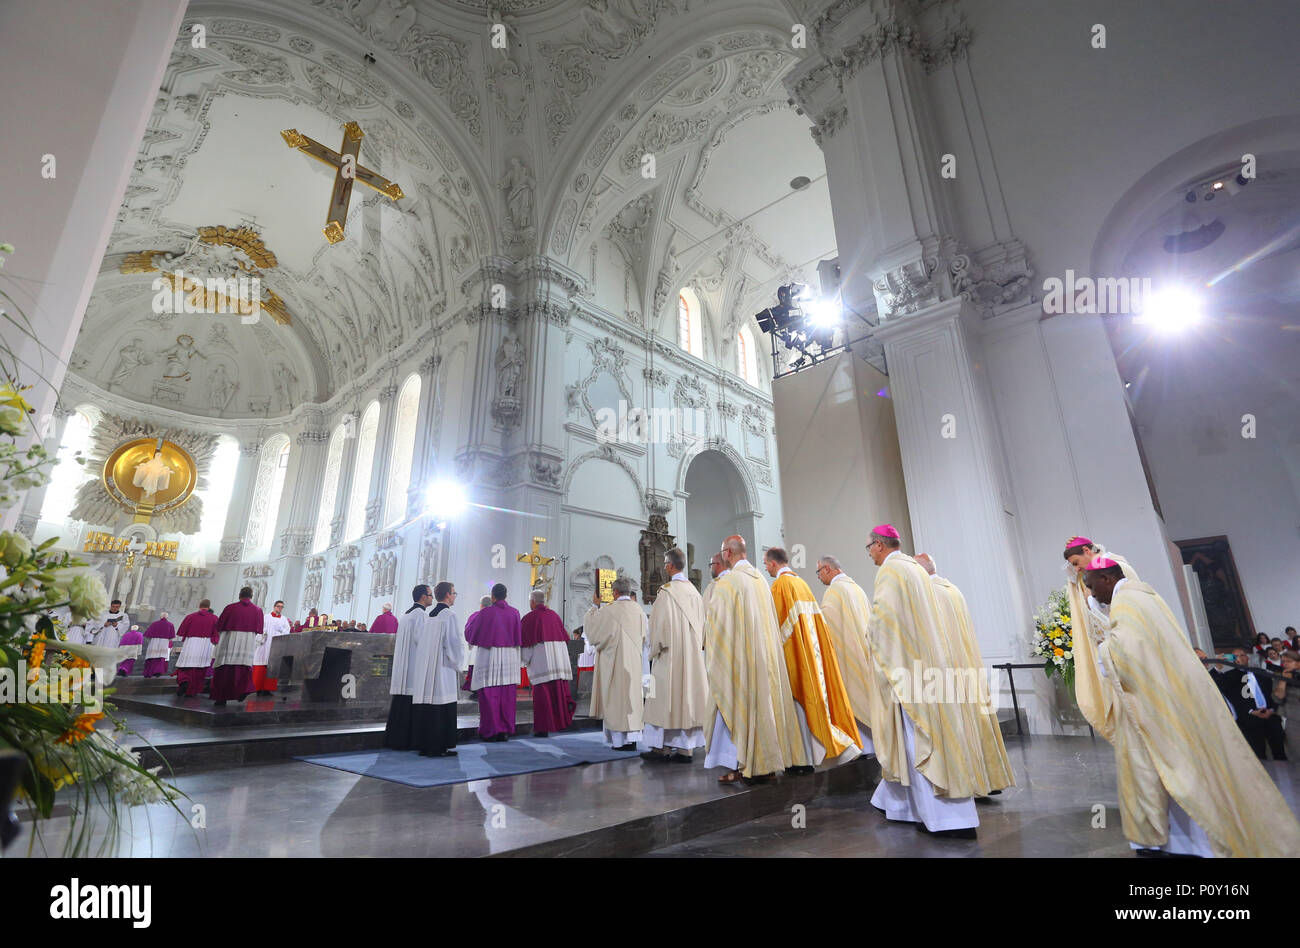 10 June 2018 Wuerzburg Germany The New Bishop Of Wuerzburg Franz Jung C Gold Dress Moves Into The Church Photo Karl Josef Hildenbrand Dpa Credit Dpa Picture Alliance Alamy Live News Stock Photo Alamy